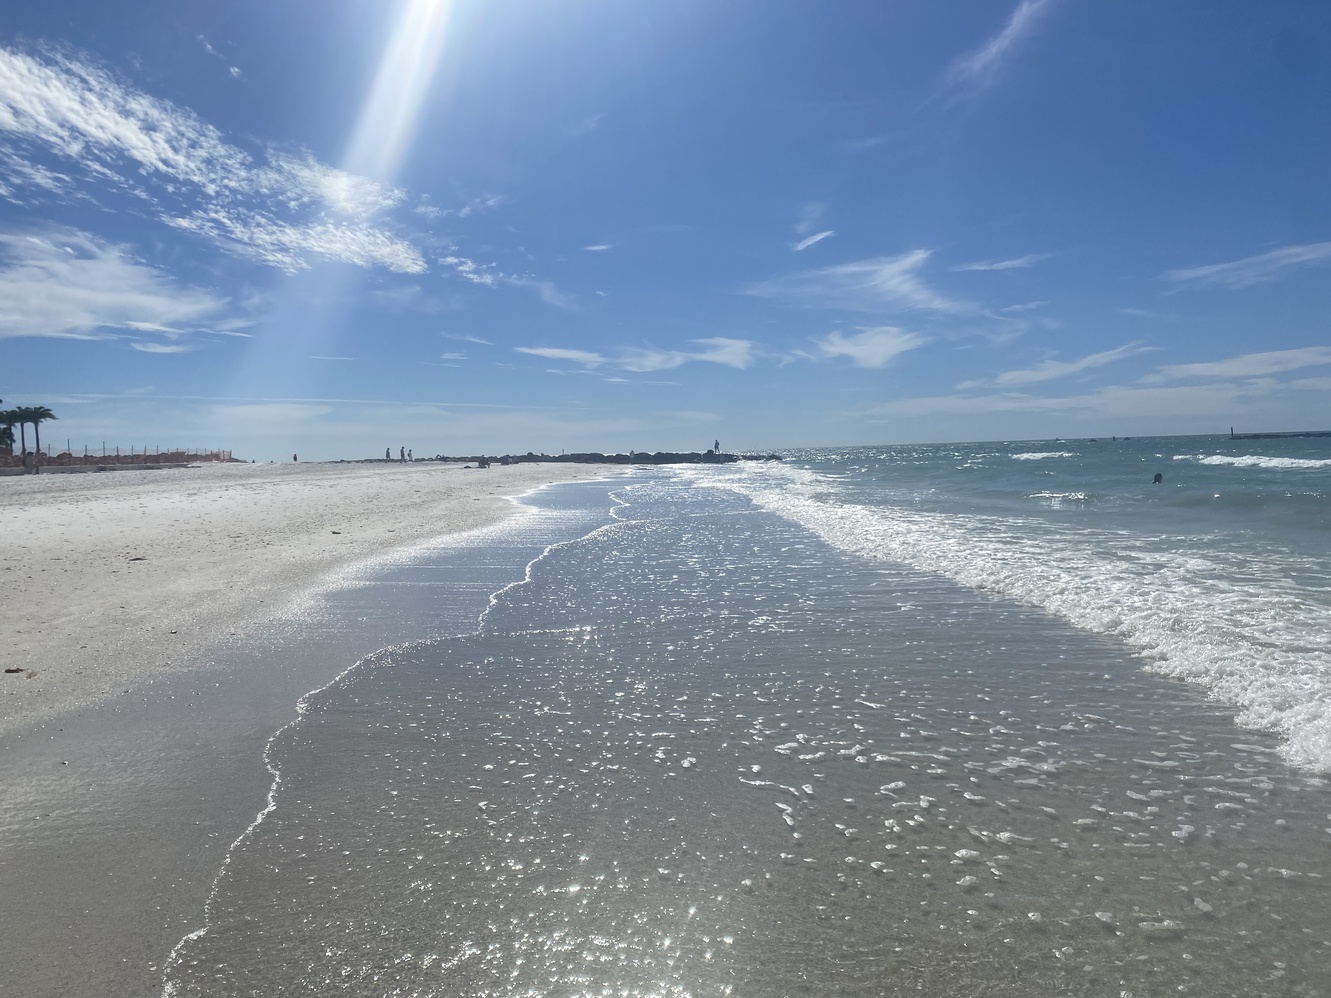 The view looks toward the southern tip of Marco Island.